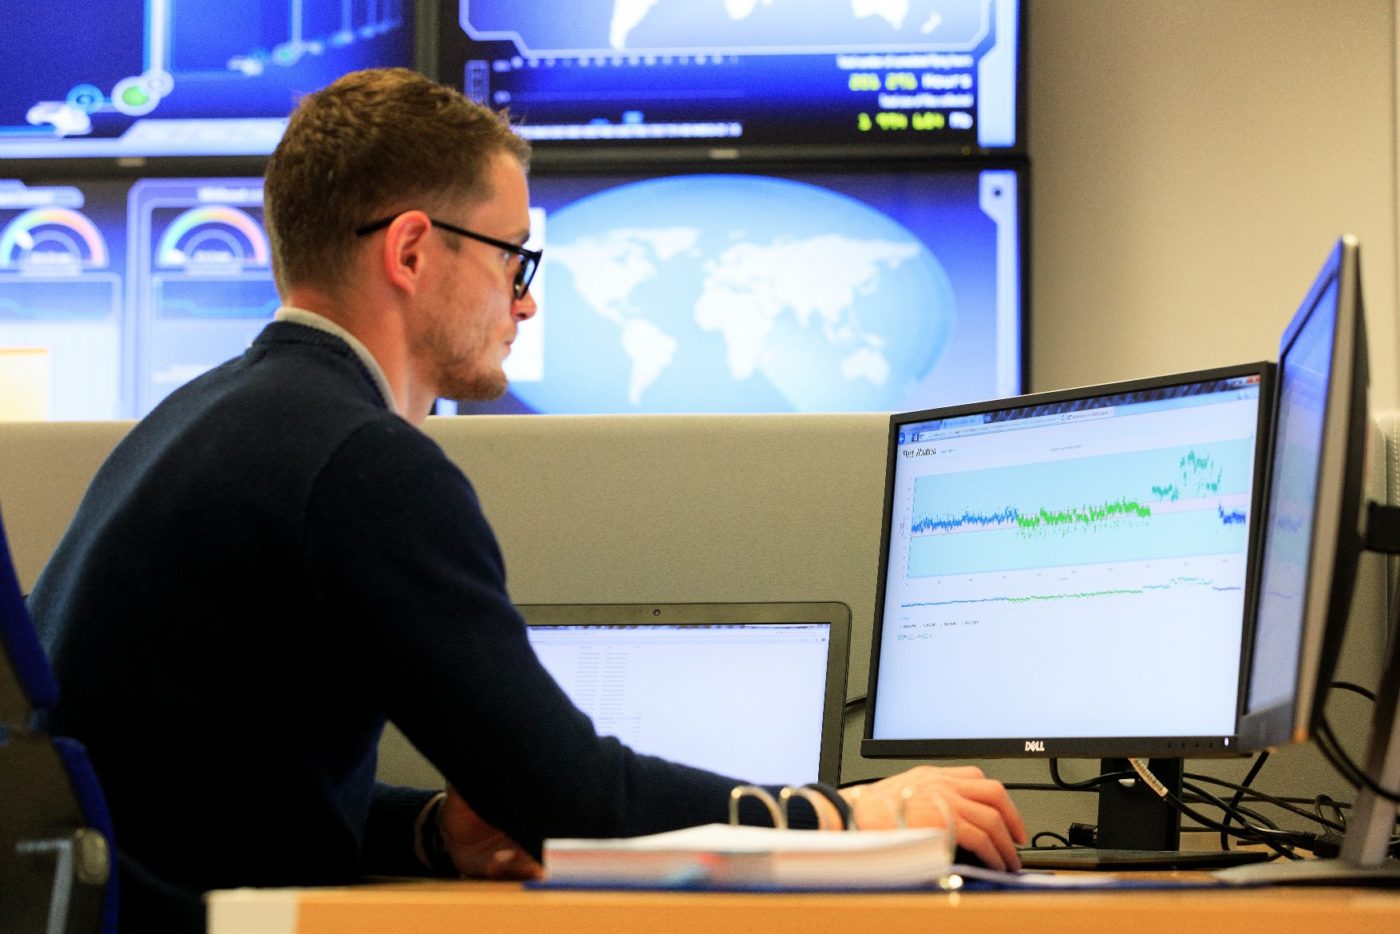 Airbus hopes to open up new possibilities through data analytics provided by its Skywise Connected Services offering. Airbus Helicopters Photo